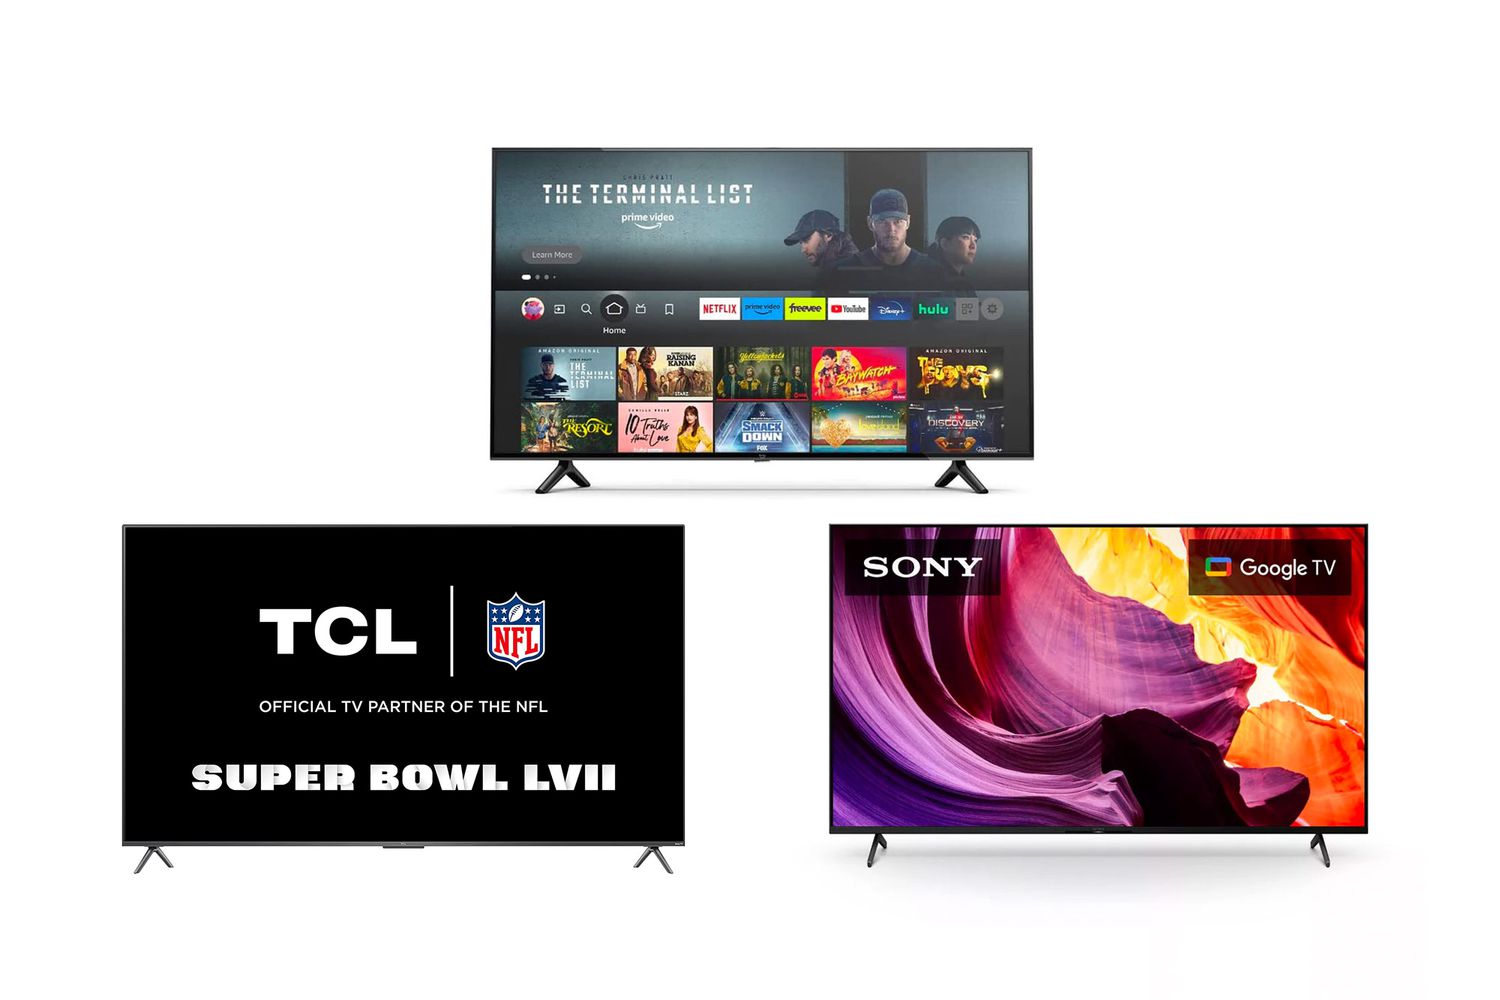 15 epic TV deals to score ahead of the Super Bowl — up to 55 percent off